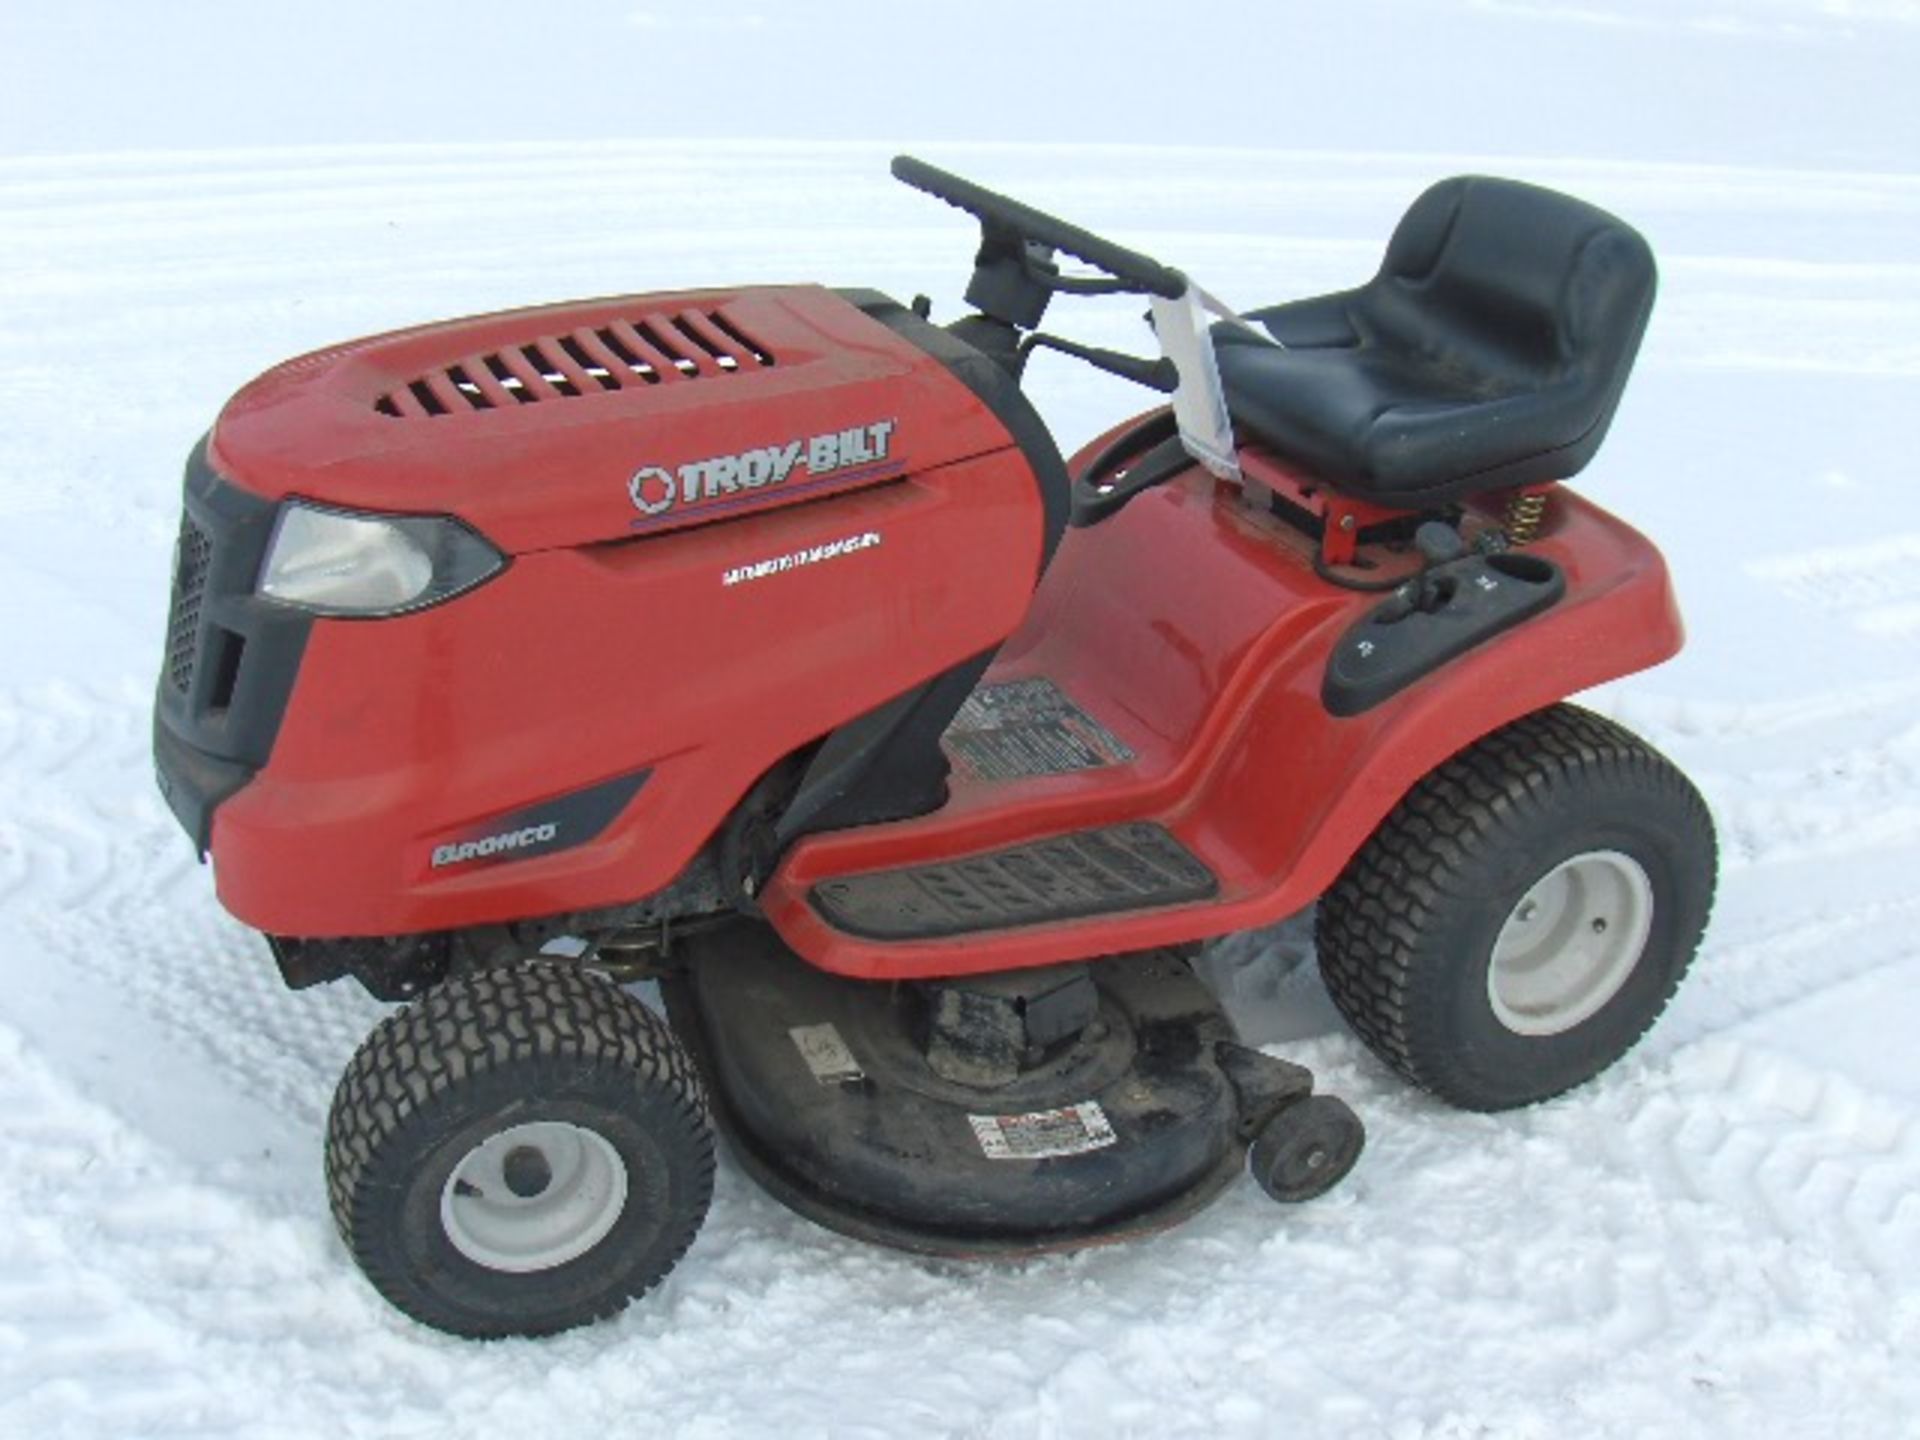 TROYBILT 18HP BRONCO   lawn mower, sold with a bill of sale only